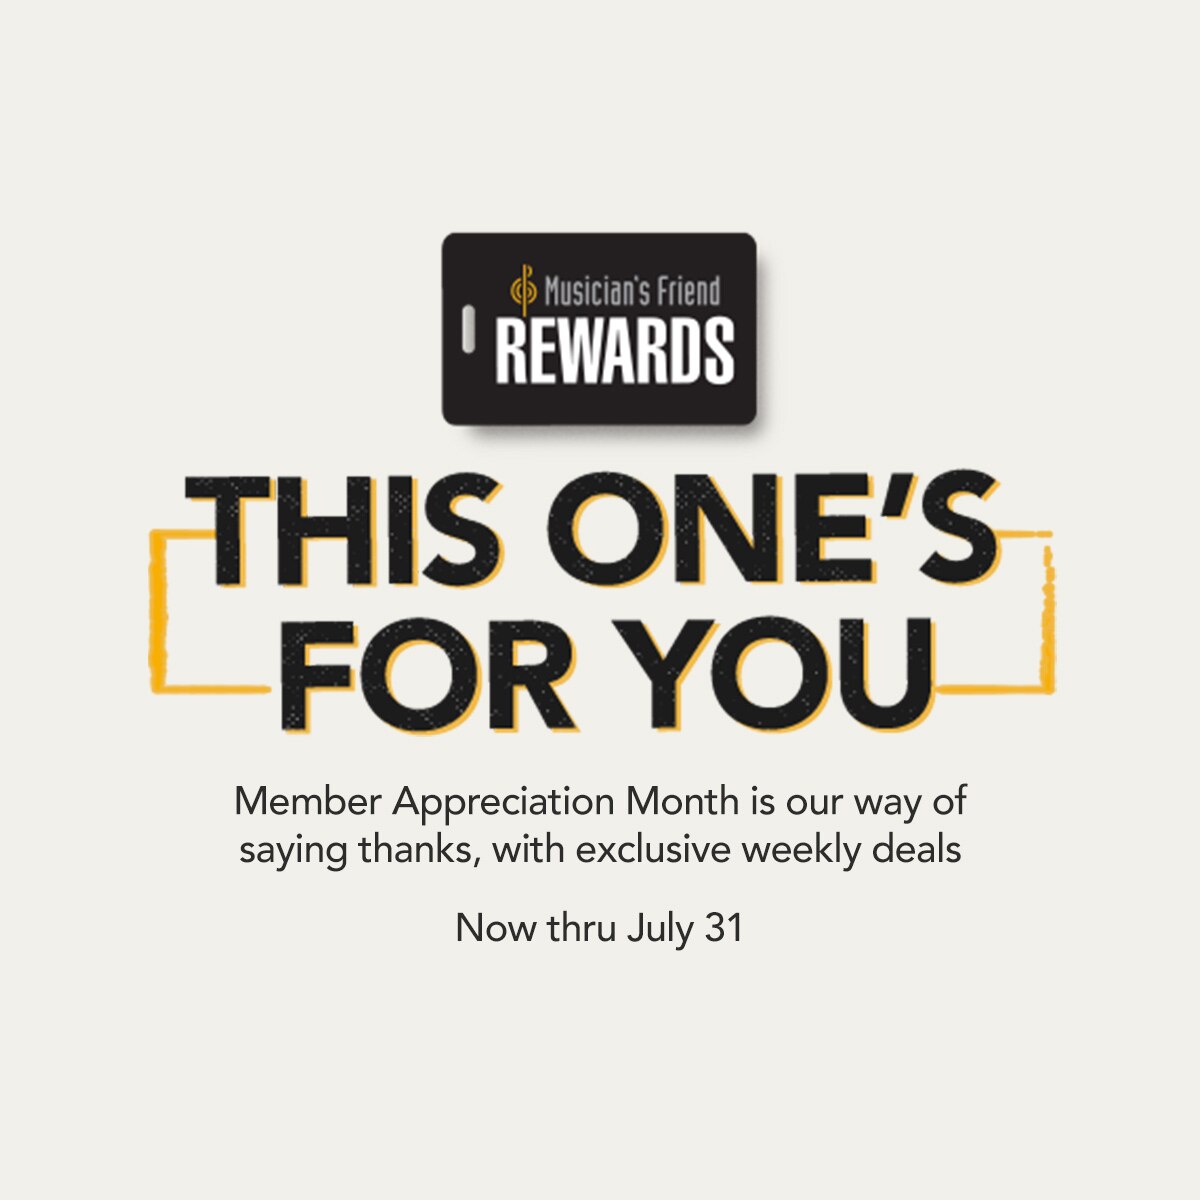 Musician's Friend Rewards. This one's for you. Member appreciation month is our way of saying thanks, with exclusive weekly deals. Now thru July 31.